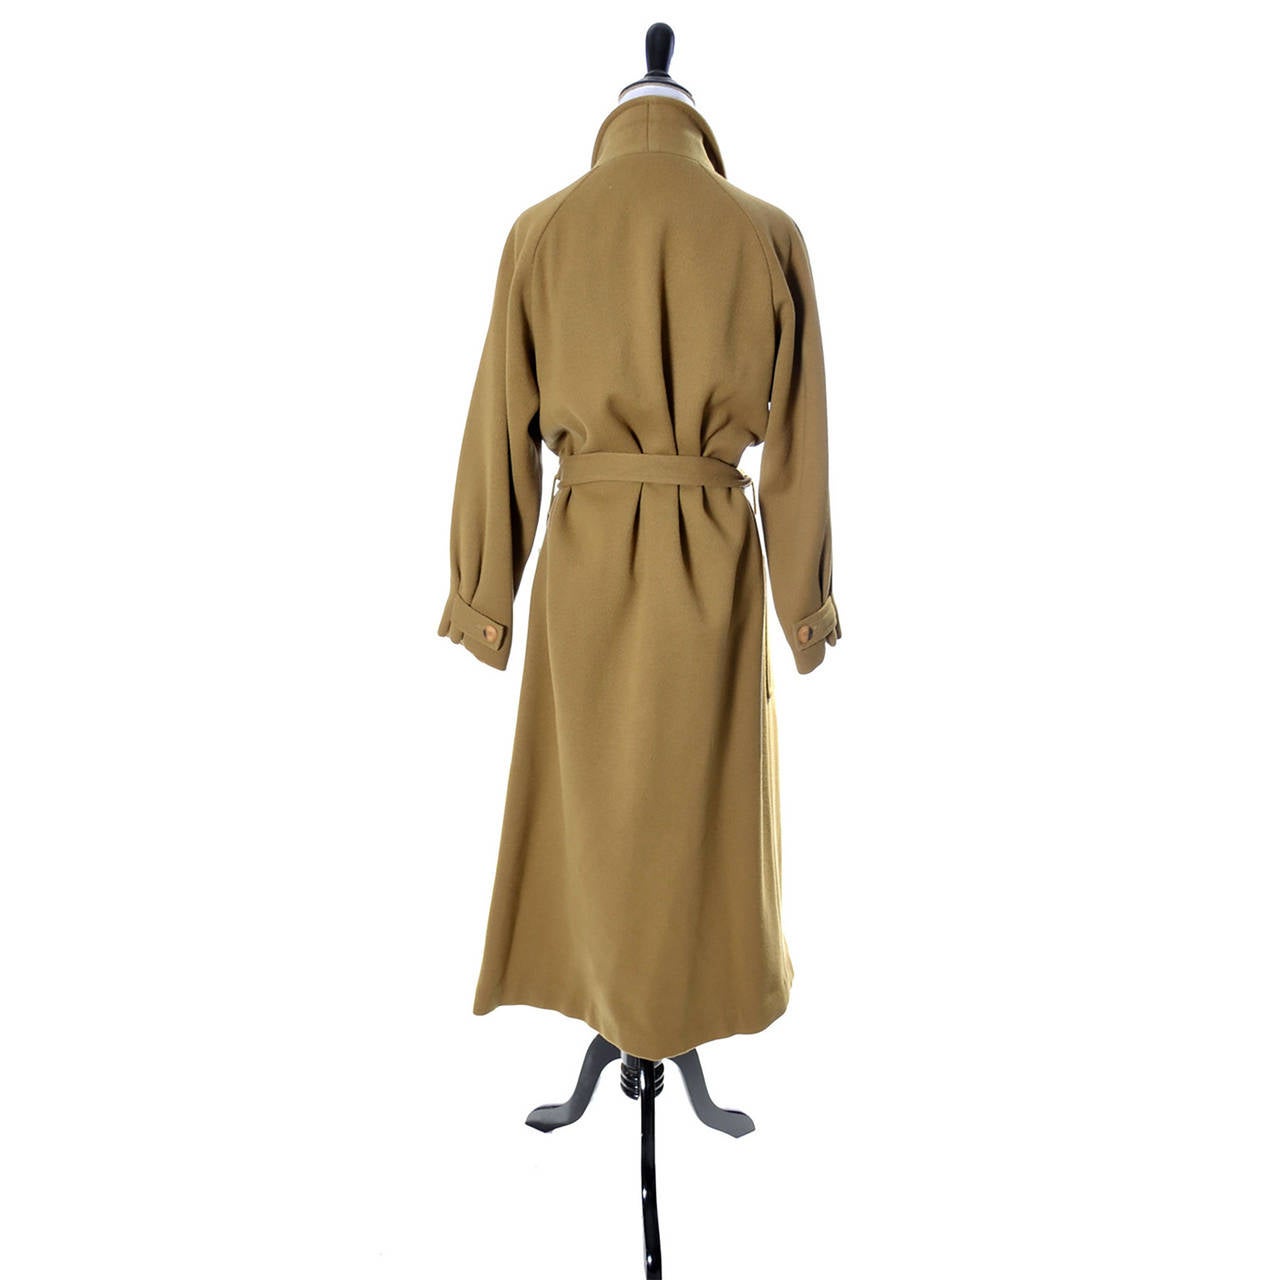 I love this Anne Klein Vintage ribbed wool knit trench coat designed by Donna Karan, who took over as head designer when Anne Klein died in 1974.  This late 70's vintage coat is just an outstanding staple for any winter closet. This coat has dolman